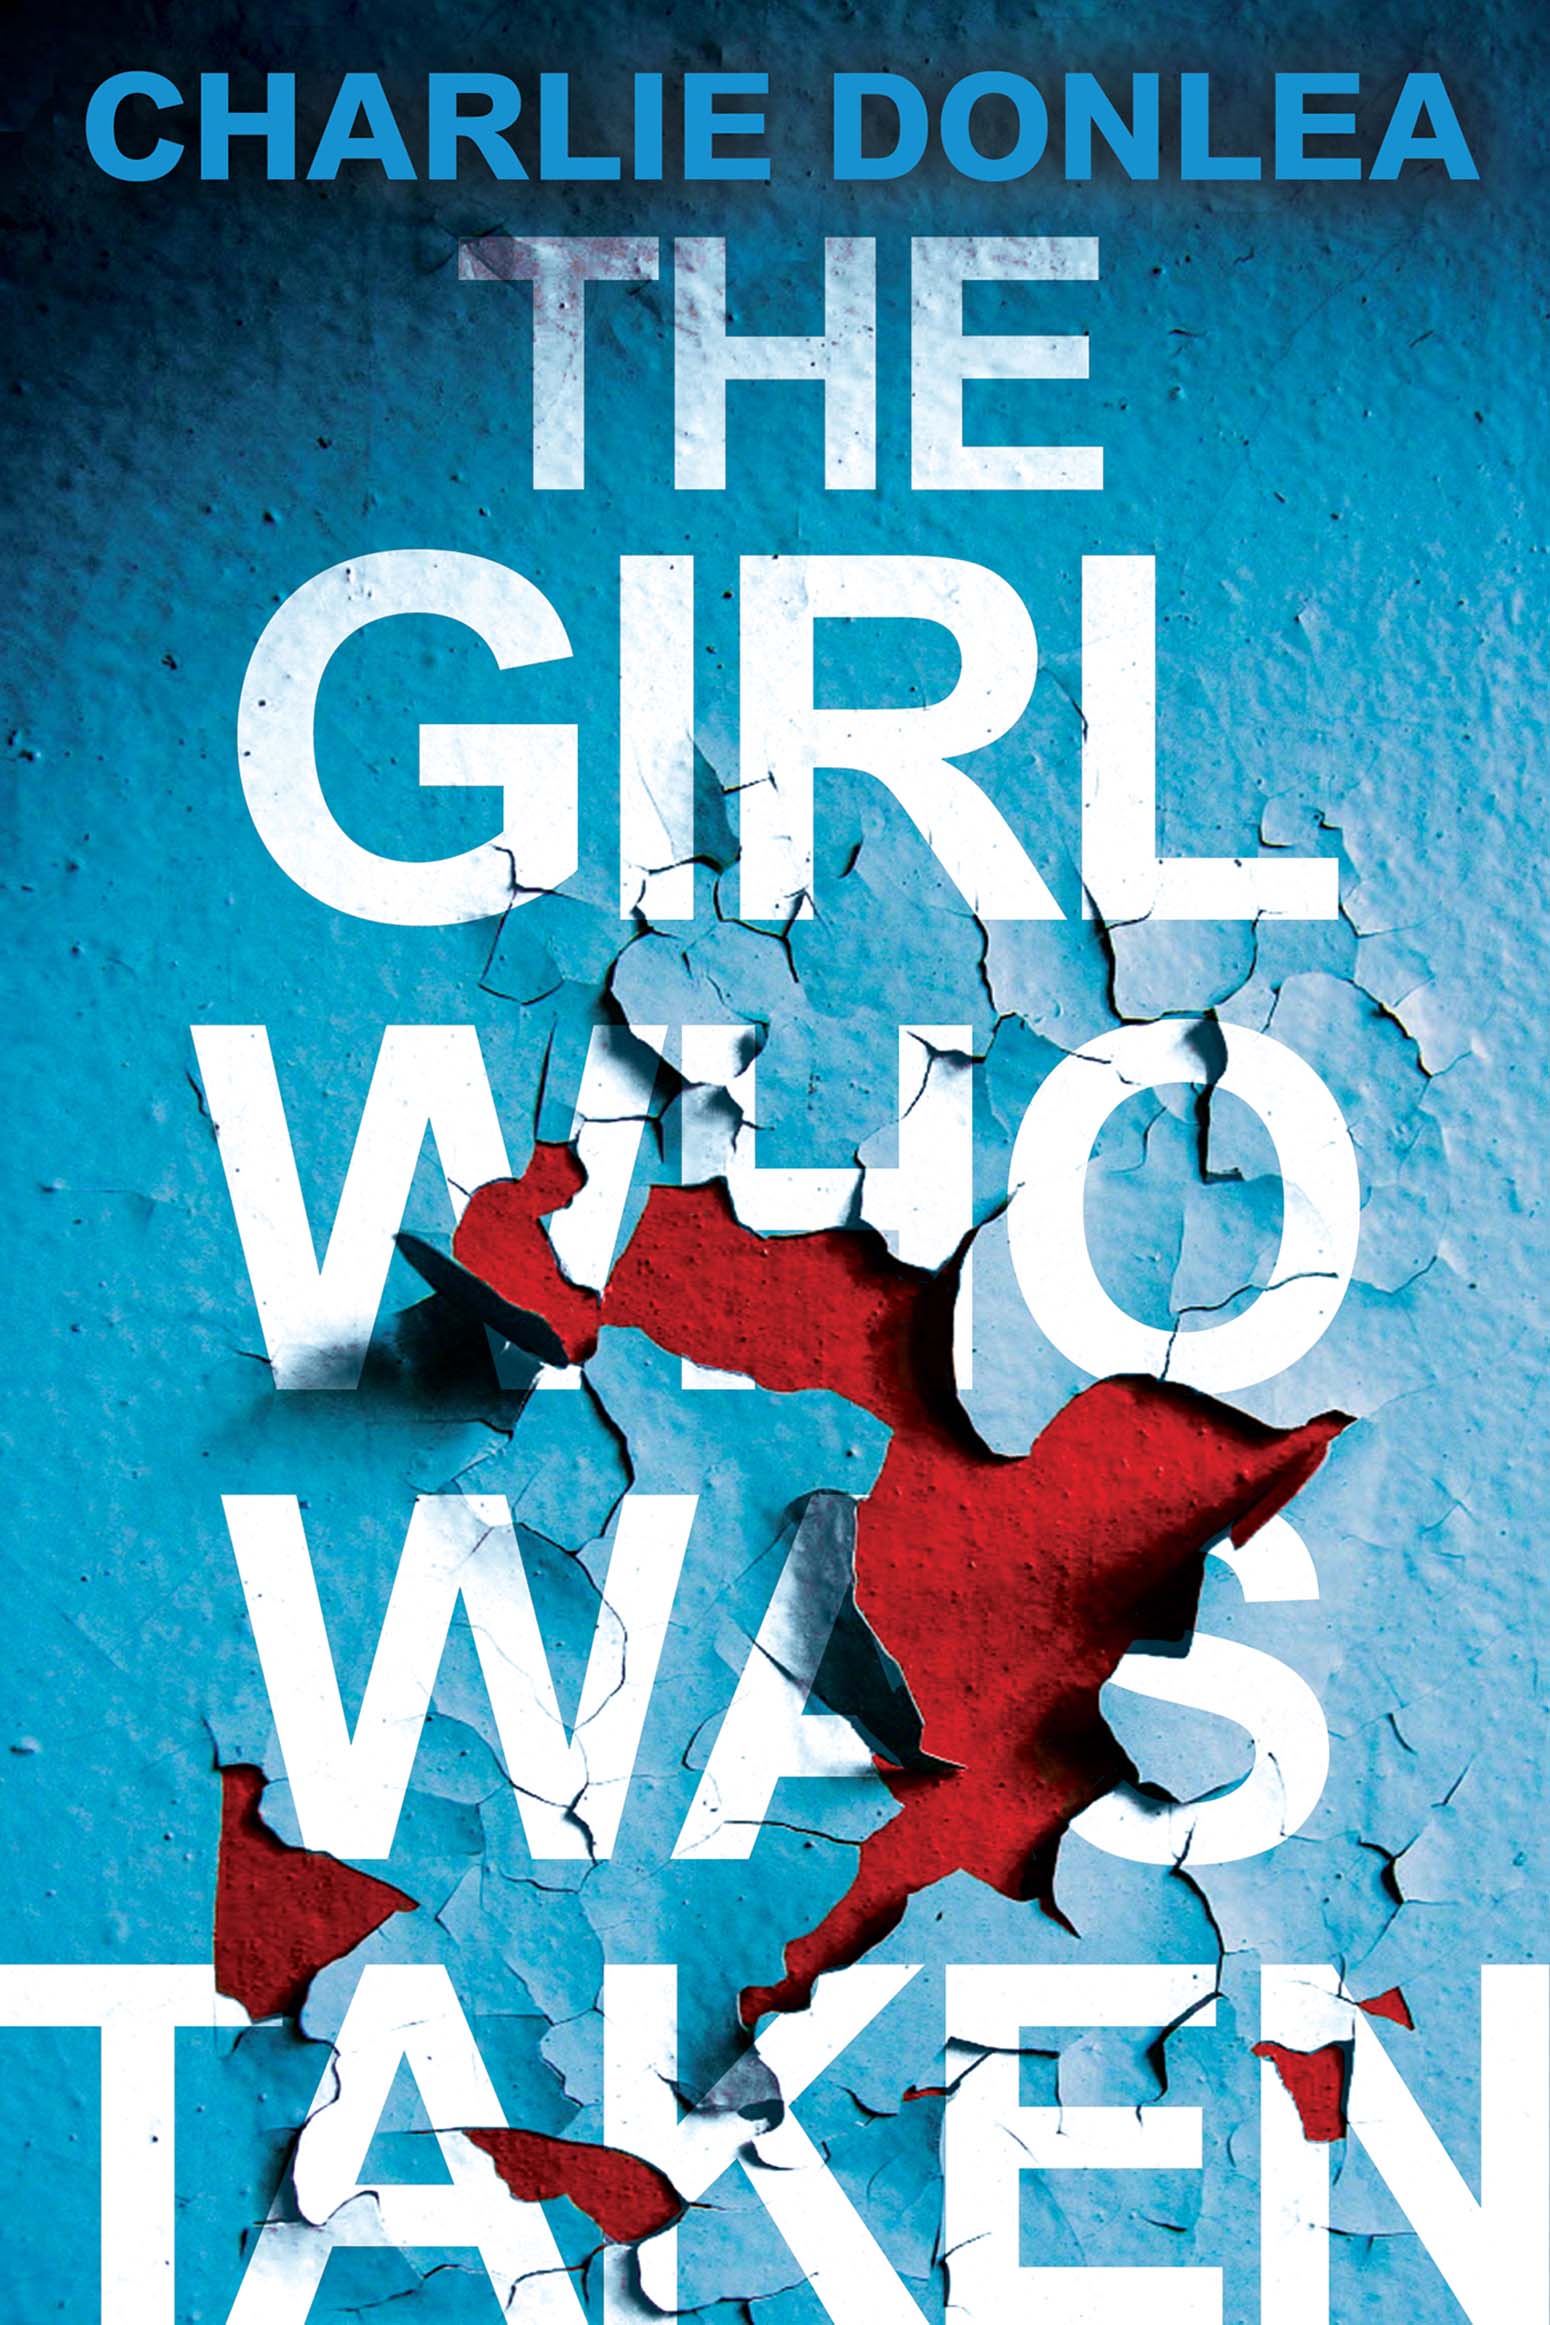 The girl who was taken cover image